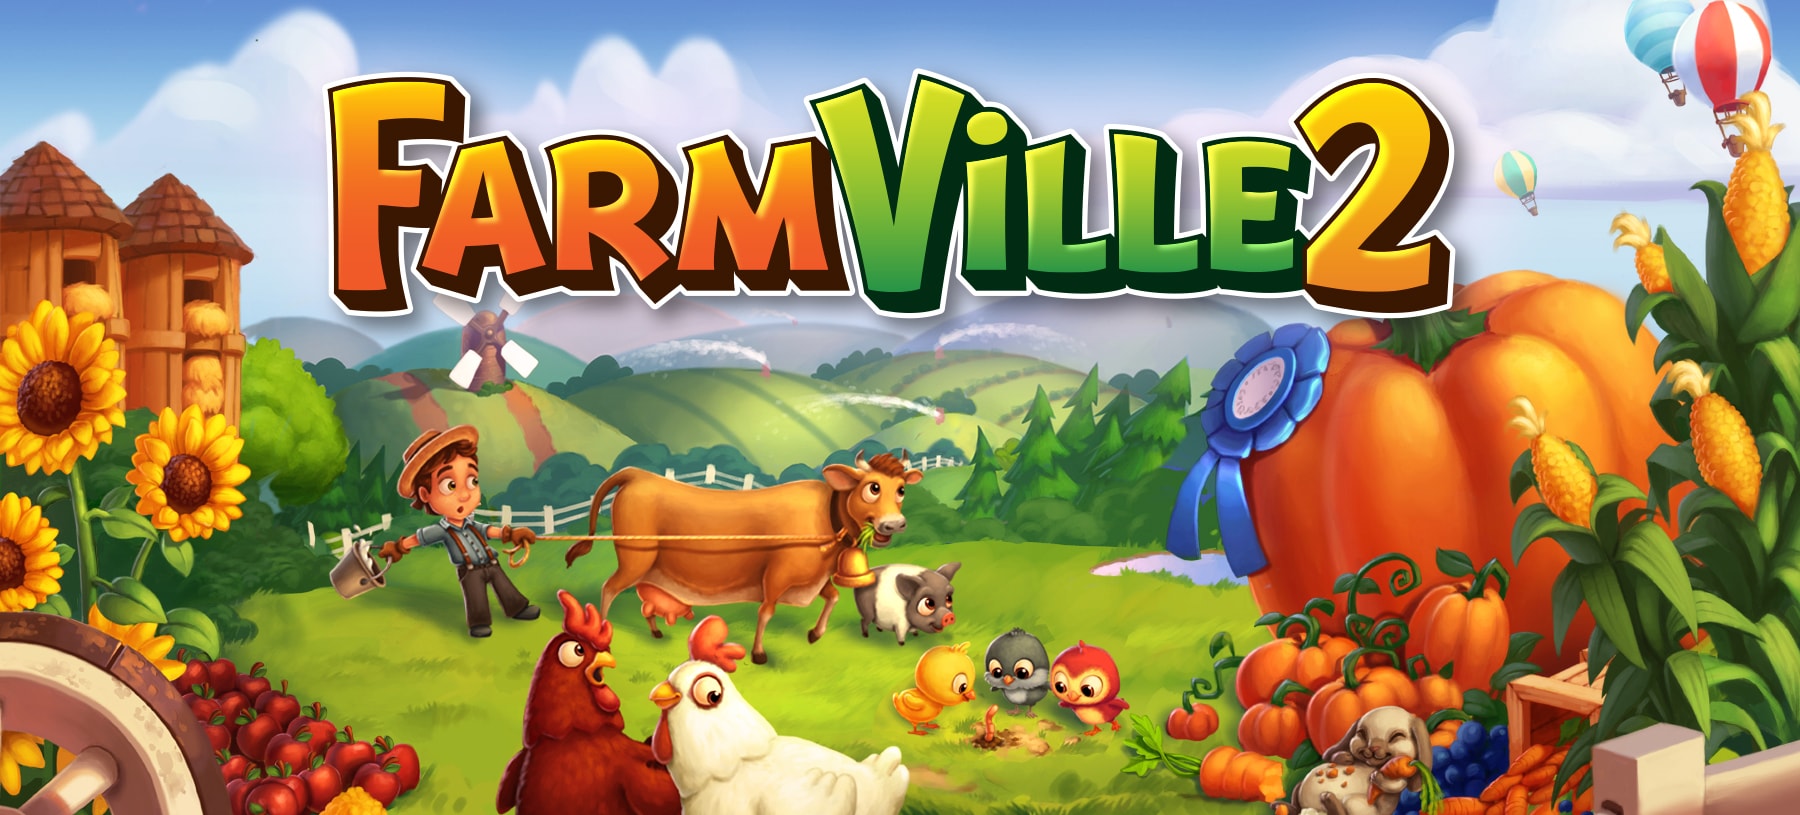 Farmville 2 free download for android apk